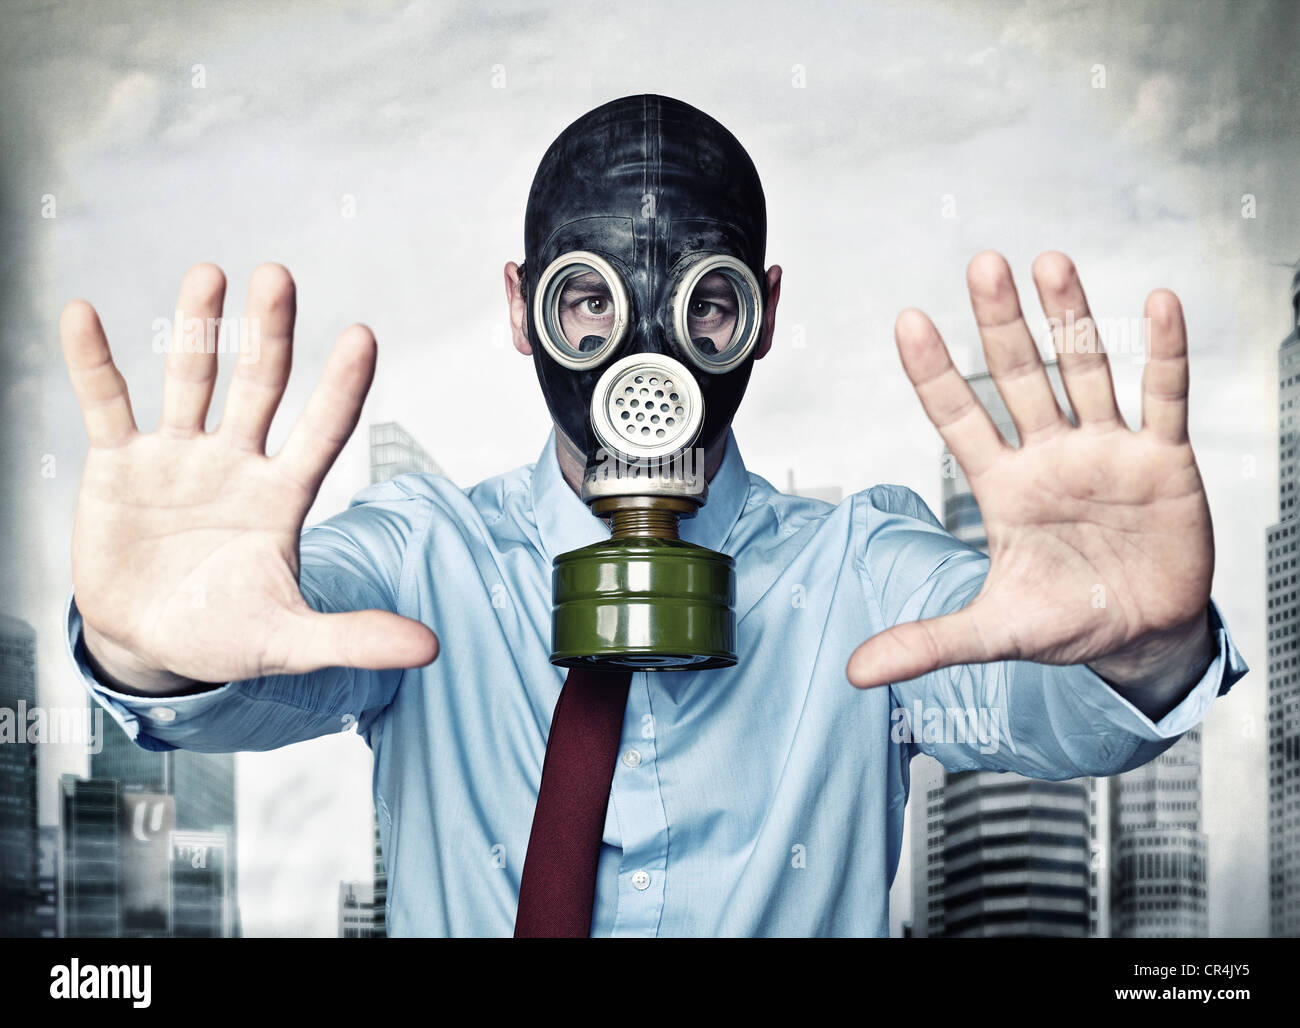 businessman with gas mask stop posture Stock Photo